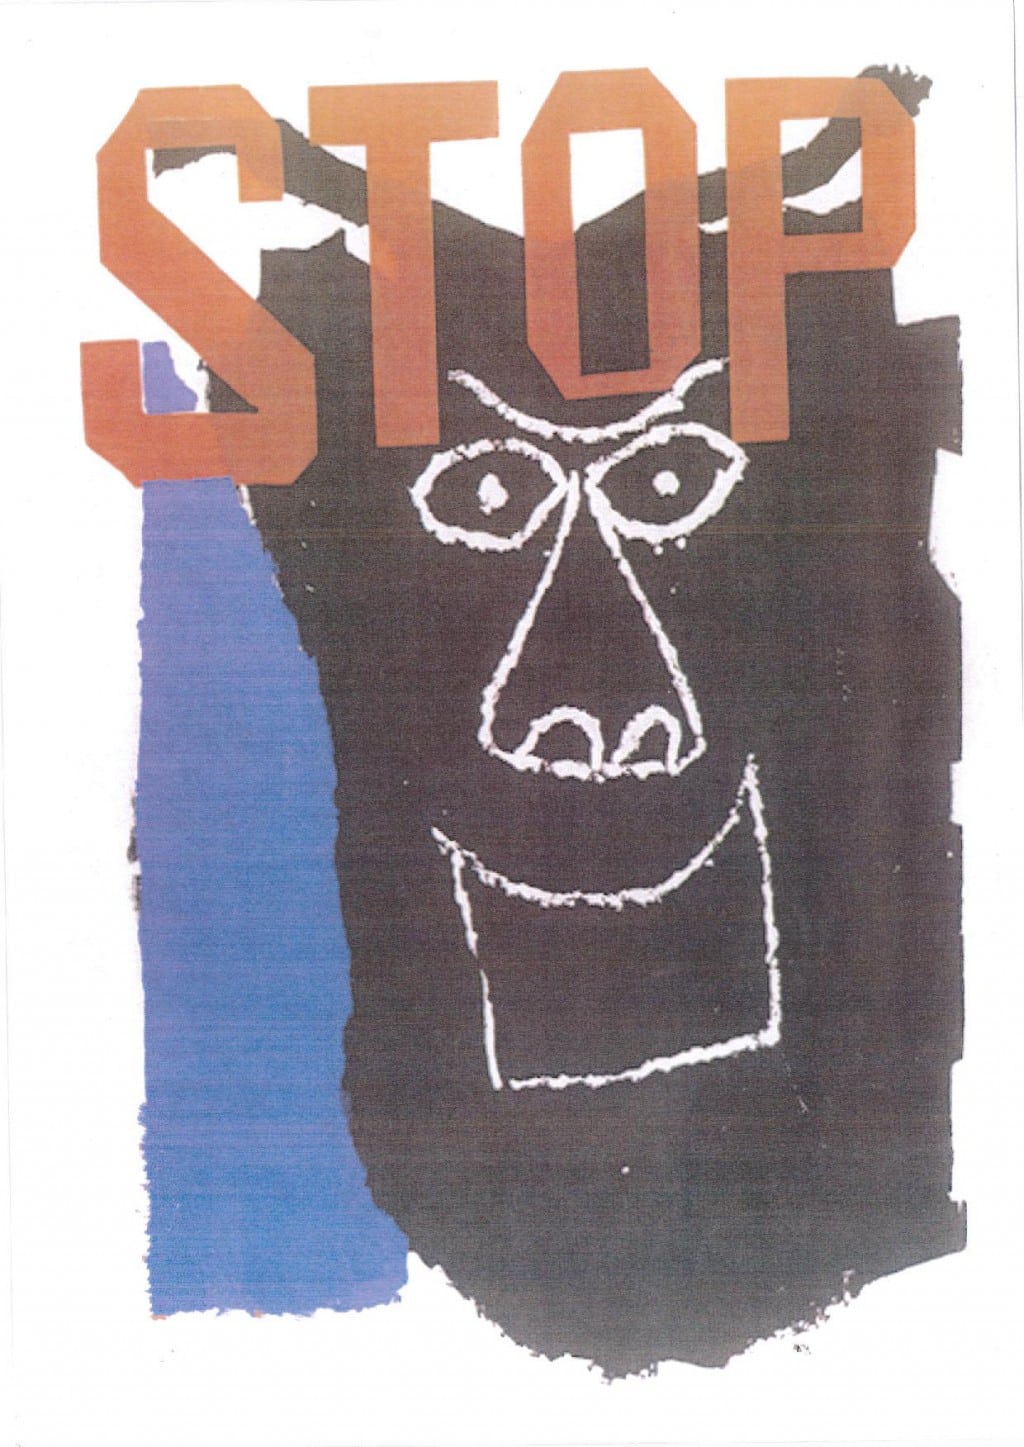 Fly poster for Dead Dog in a Suitcase. Design is in a bold, graphic style. There is an abstract black rectangular shape, which looks like it has horns, drawn on top of this in thin white lines is a face with a wide open mouth, possibly smiling. There is a vertical bold stripe of blue to the left of the shape and written across the top, partially over the top of the face, in bold red lettering is the word 'Stop' in large capital letters, of differing sizes.